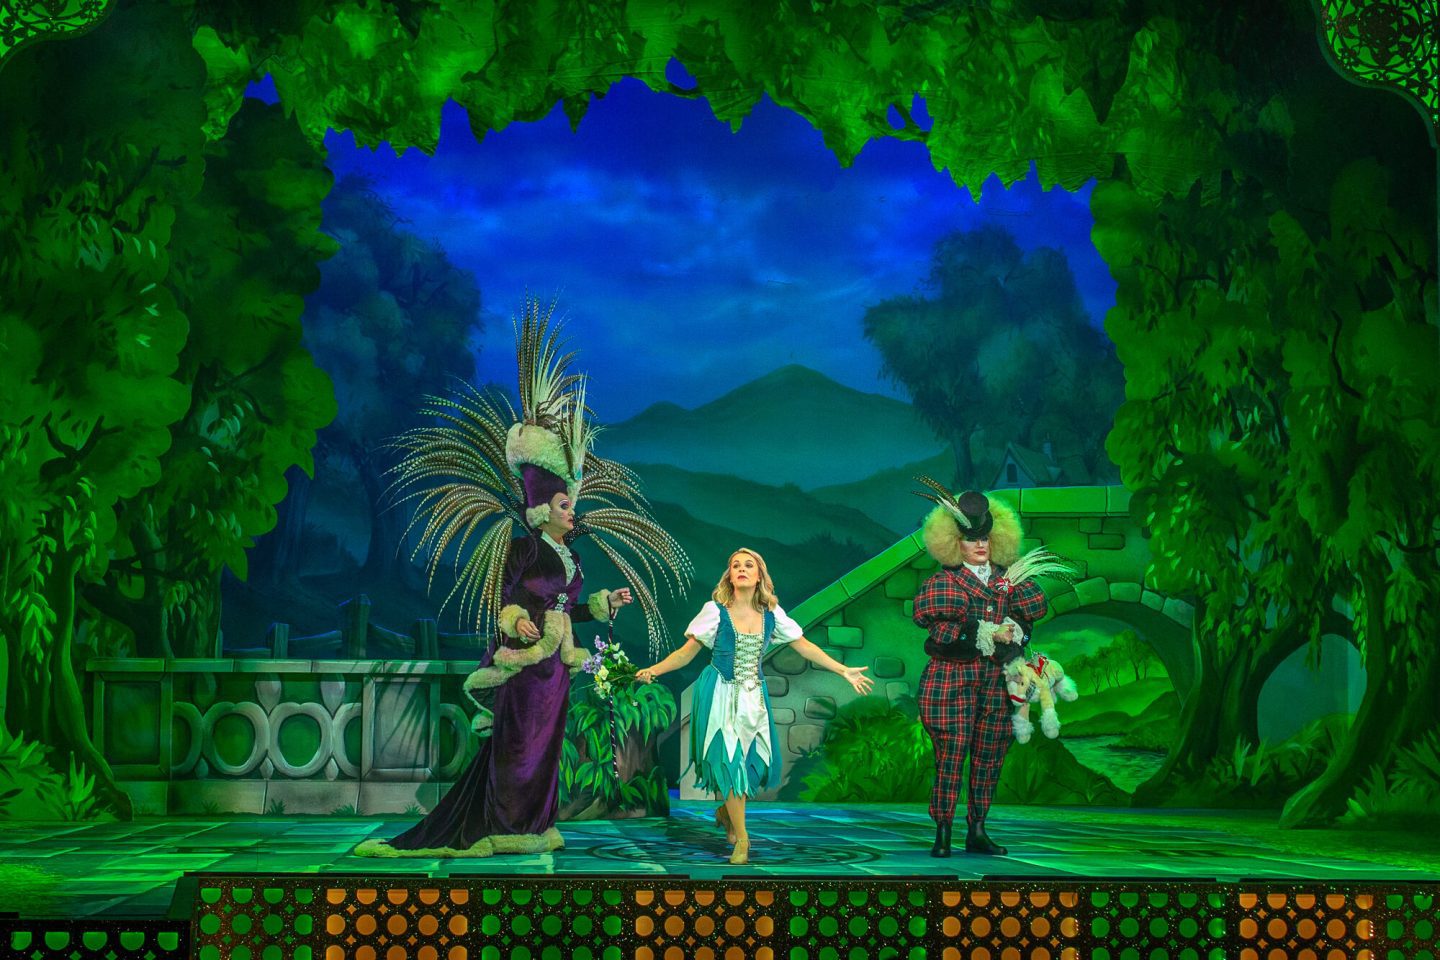 Cinderella  and the ugly sisters on stage with a green backdrop